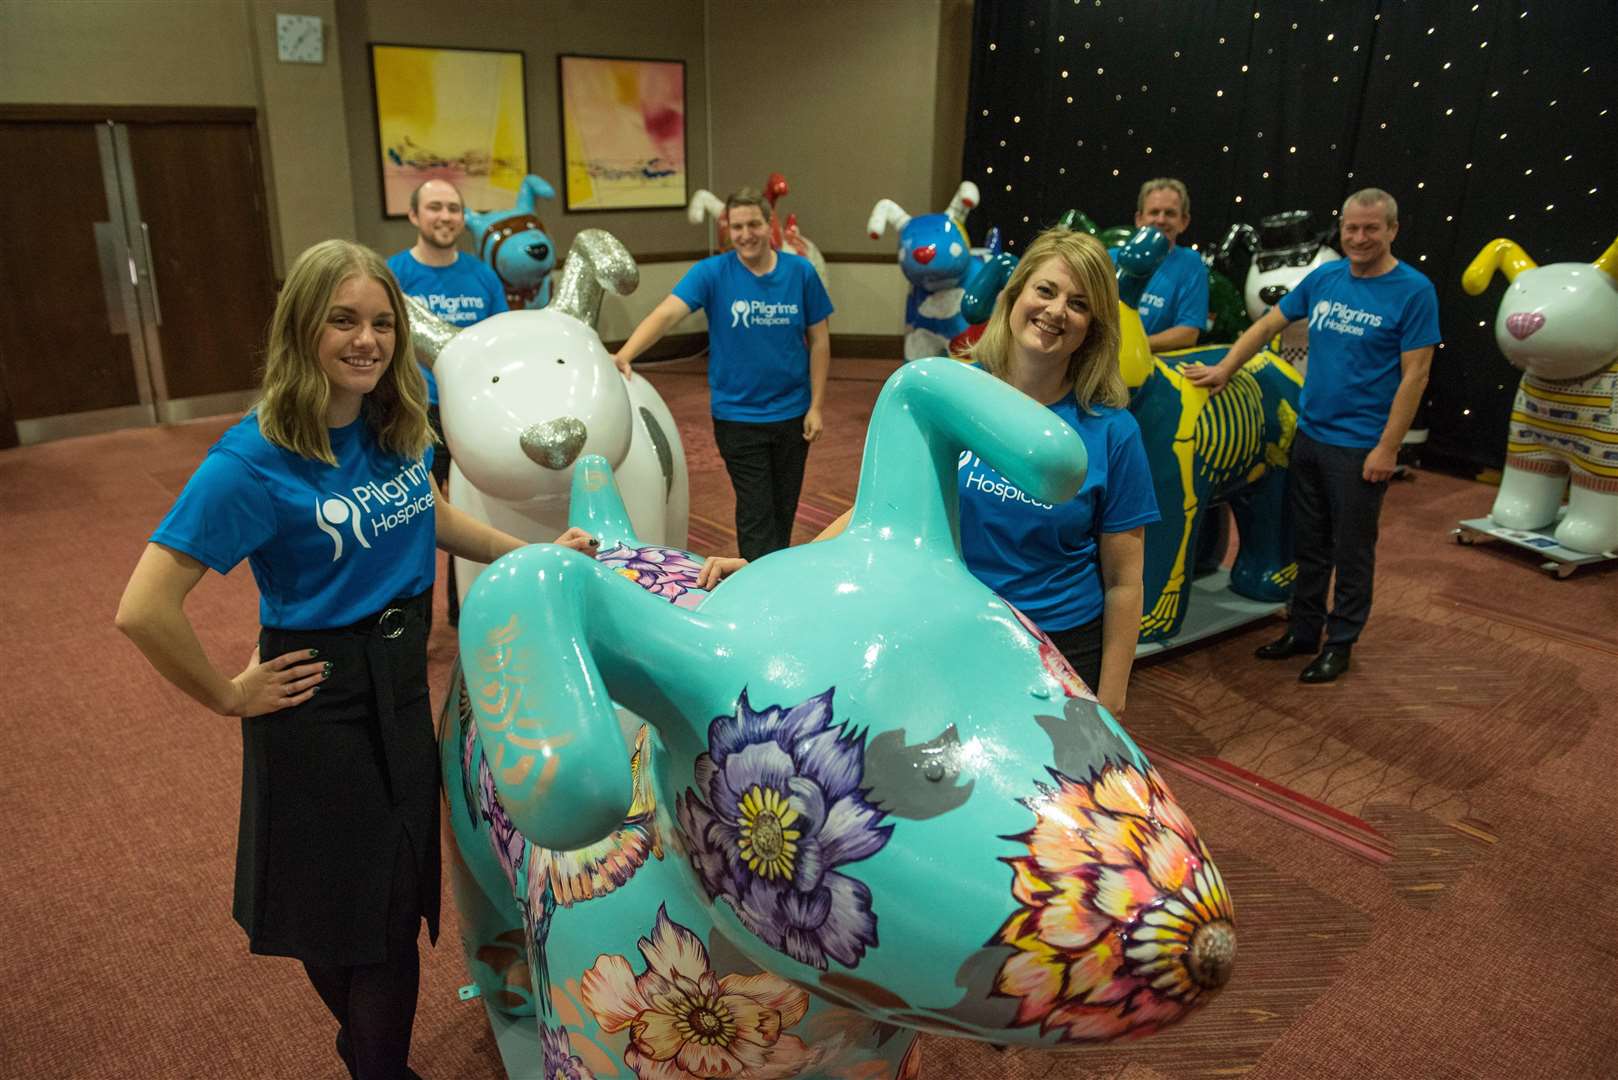 Pilgrims Hospice staff preparing to wheel the Snowdogs into the auction room